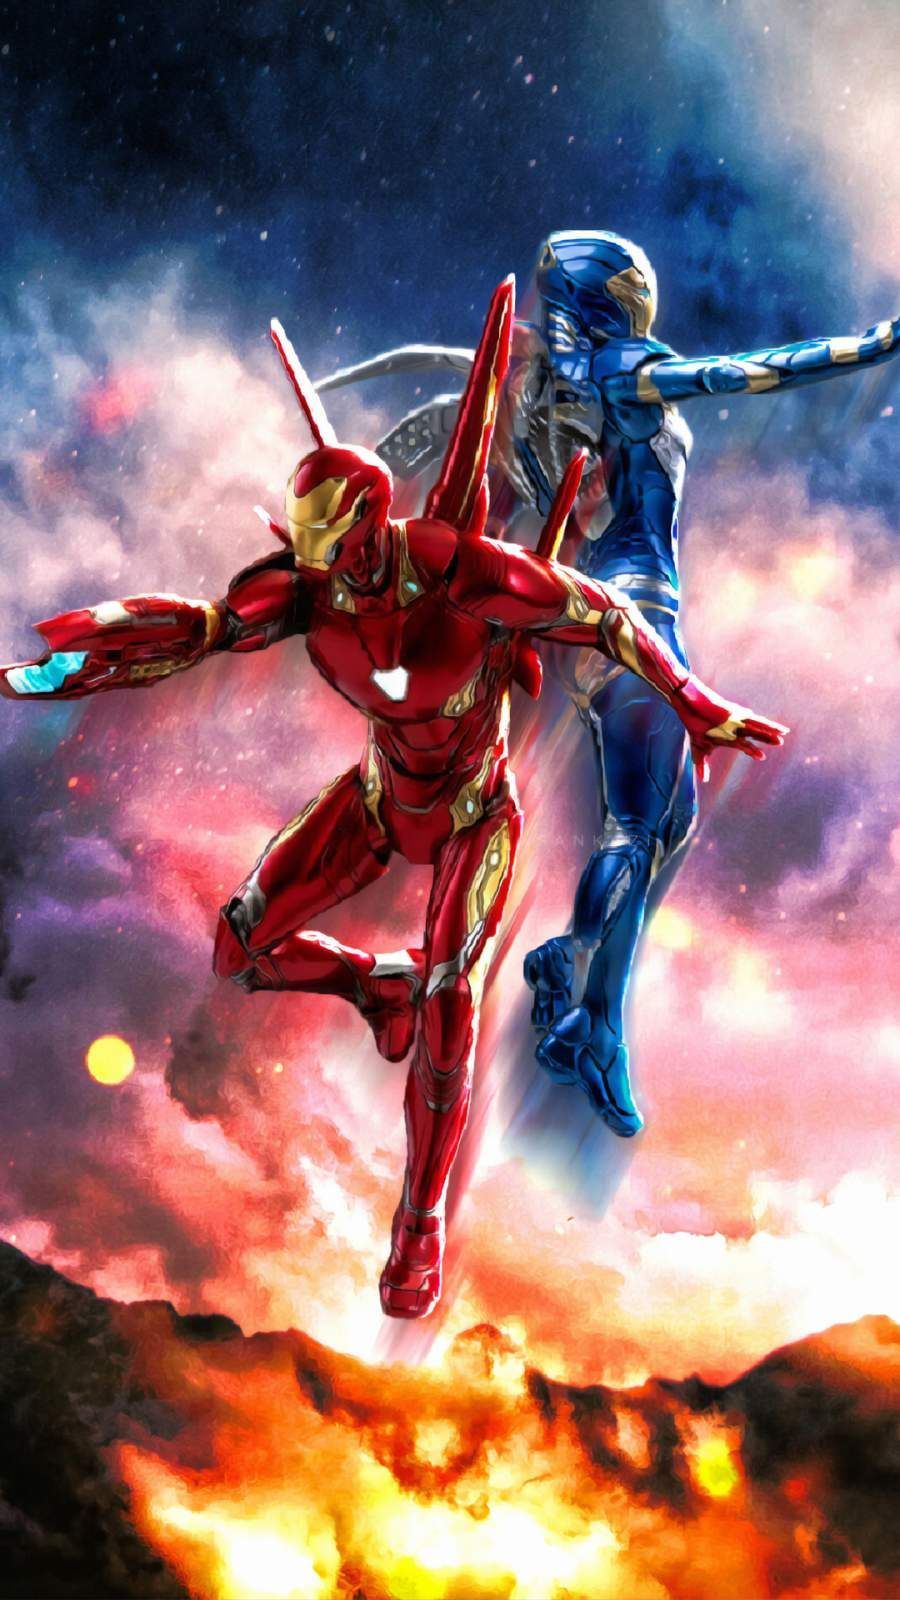 Iron Man and Pepper Potts Rescue Suit iPhone Wallpaper. Iron man wallpaper, Iron man art, Marvel wallpaper